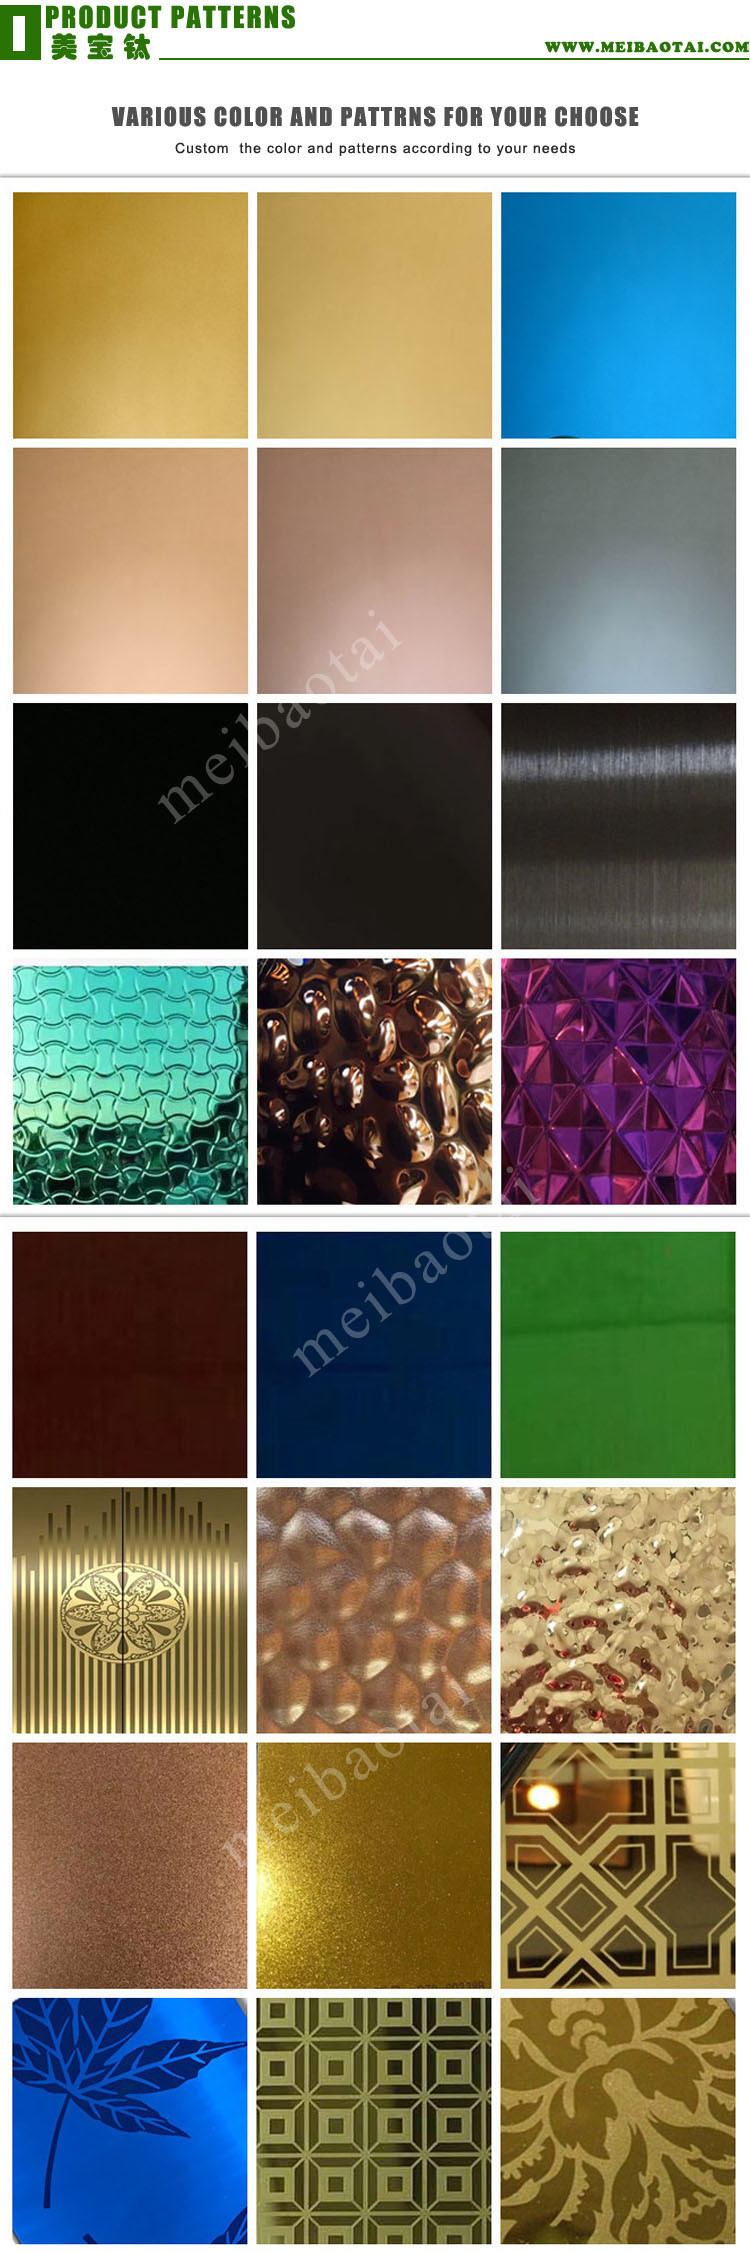 Mirror Stainless Steel PVD Color Coating Stainless Steel Sheets Black Mirror Finish Stainless Steel Sheets